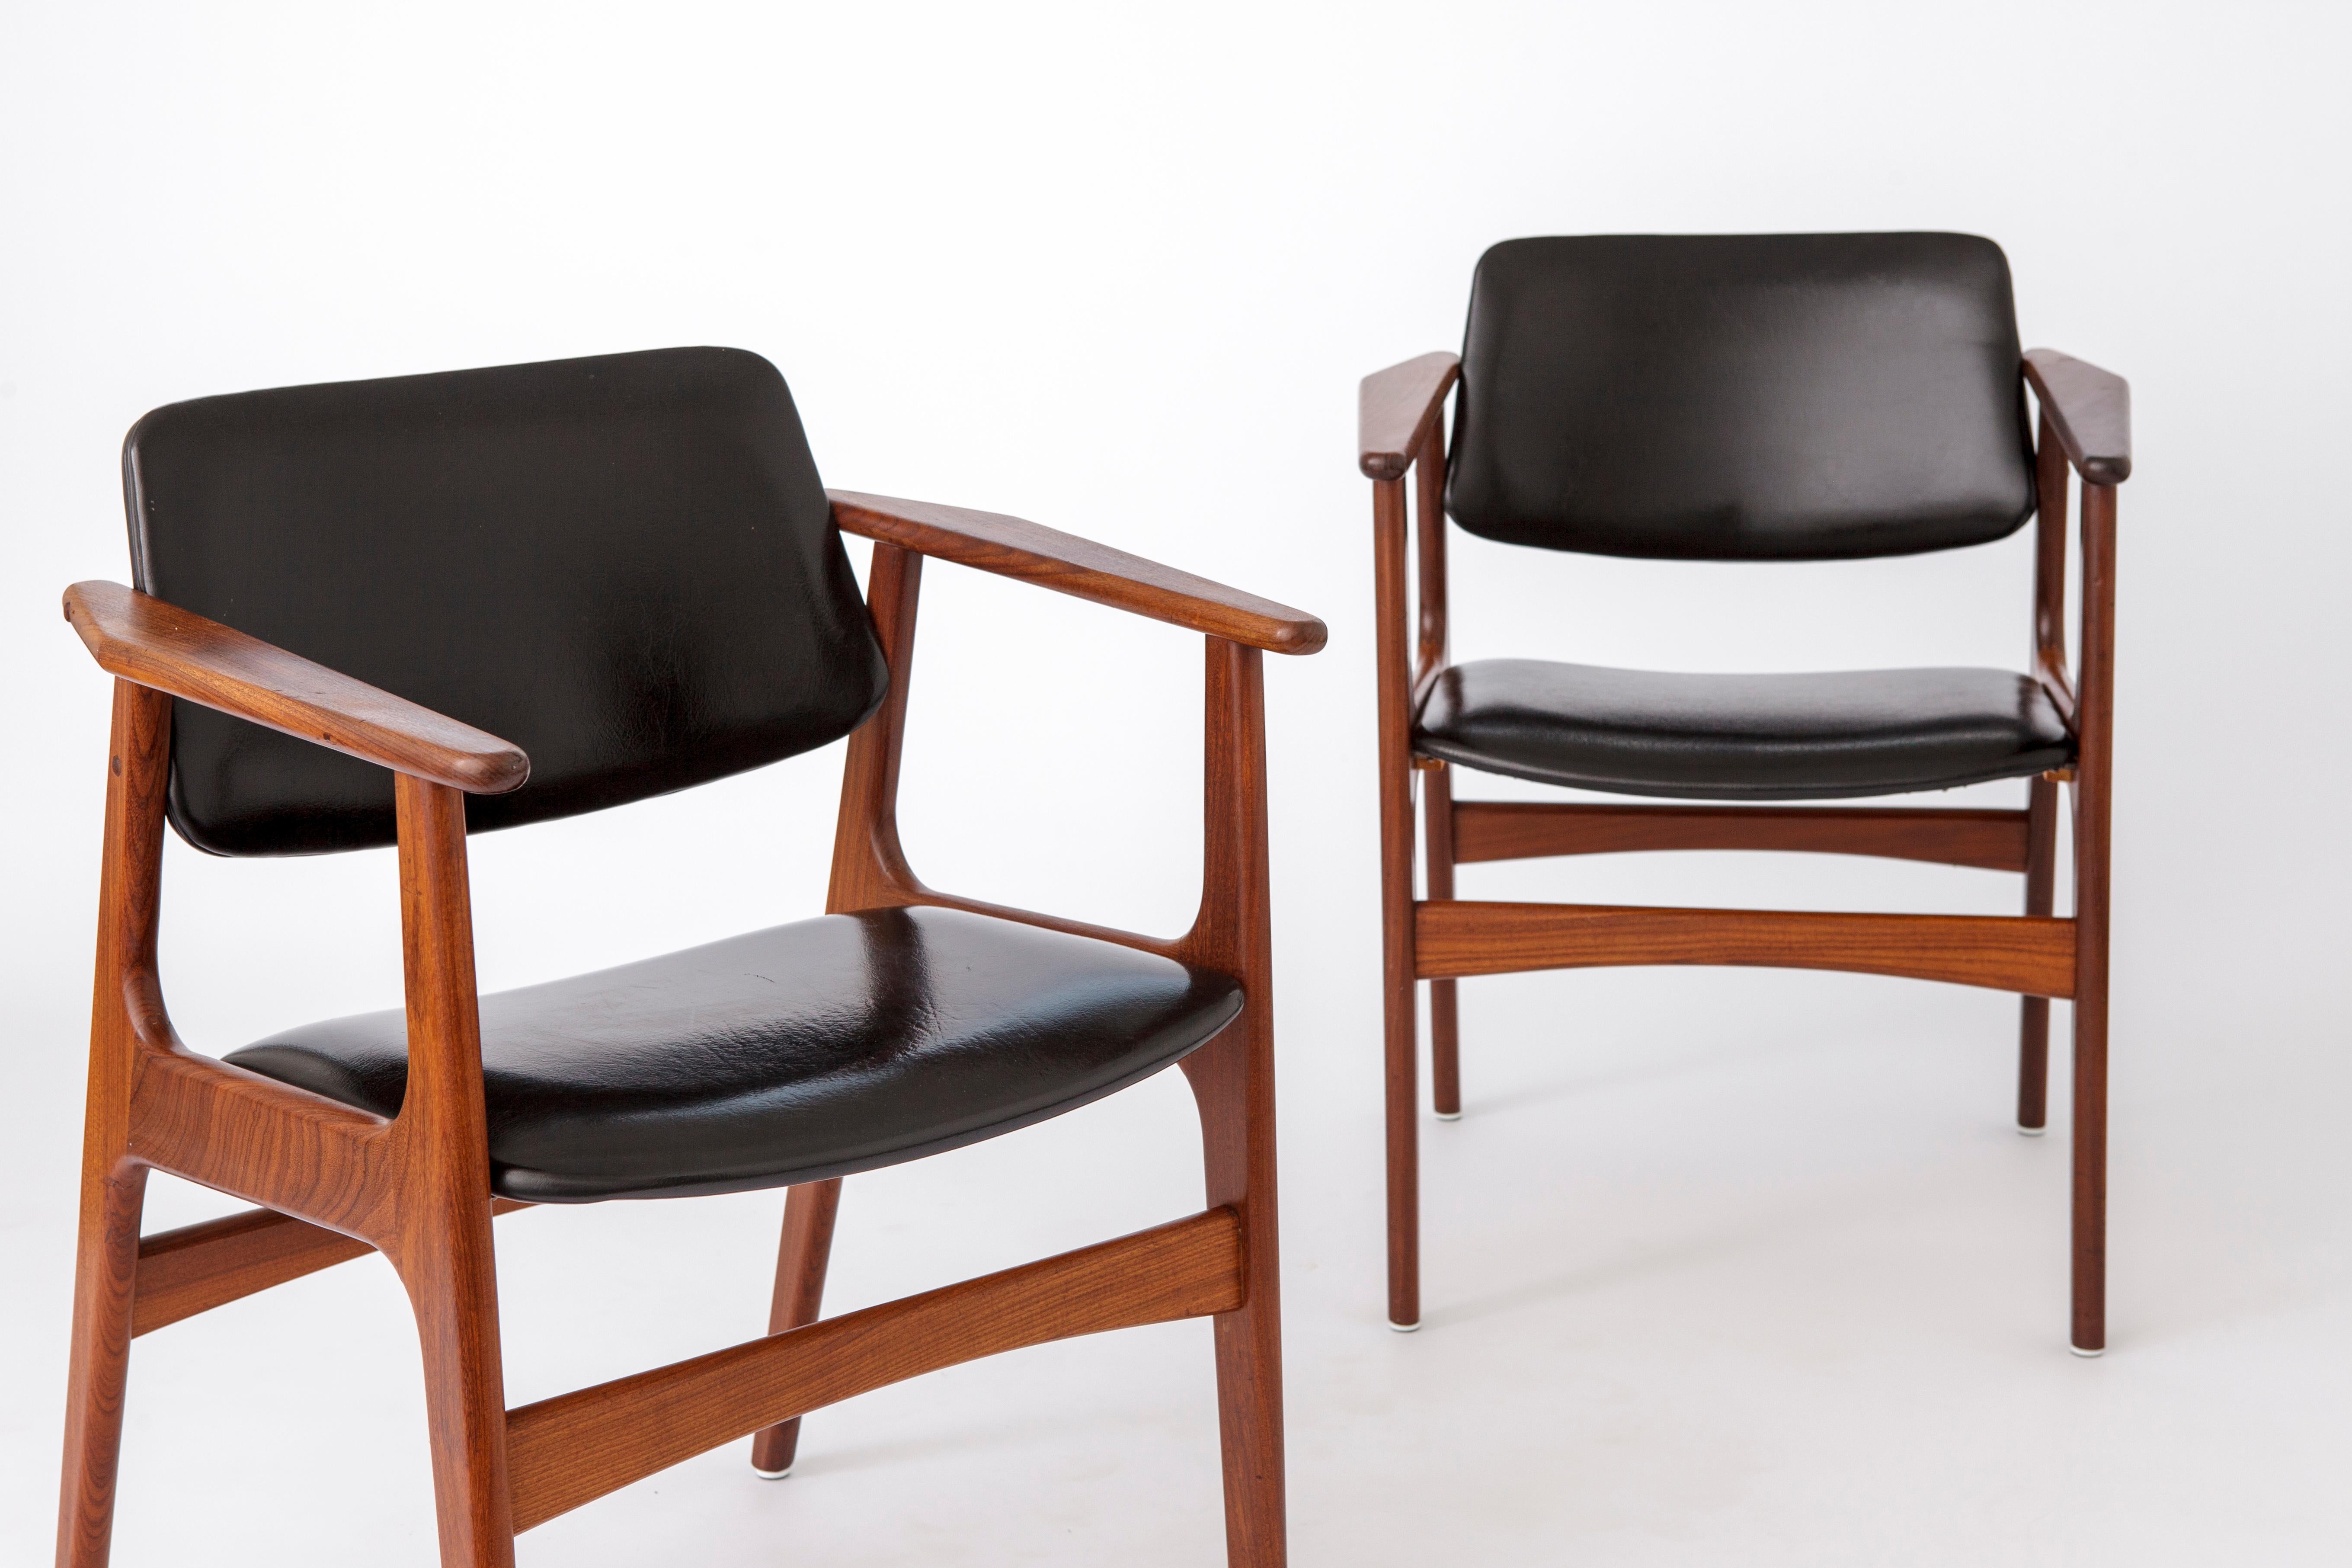 Pair of armchairs by Danish designer Arne Vodder. 
Production period: 1960s. 
Displayed price is for 2 armchairs. 

Stable and sturdy teak frames. No cracks or repairs. 
Original black artificial leather seat and back cover in very good condition. 